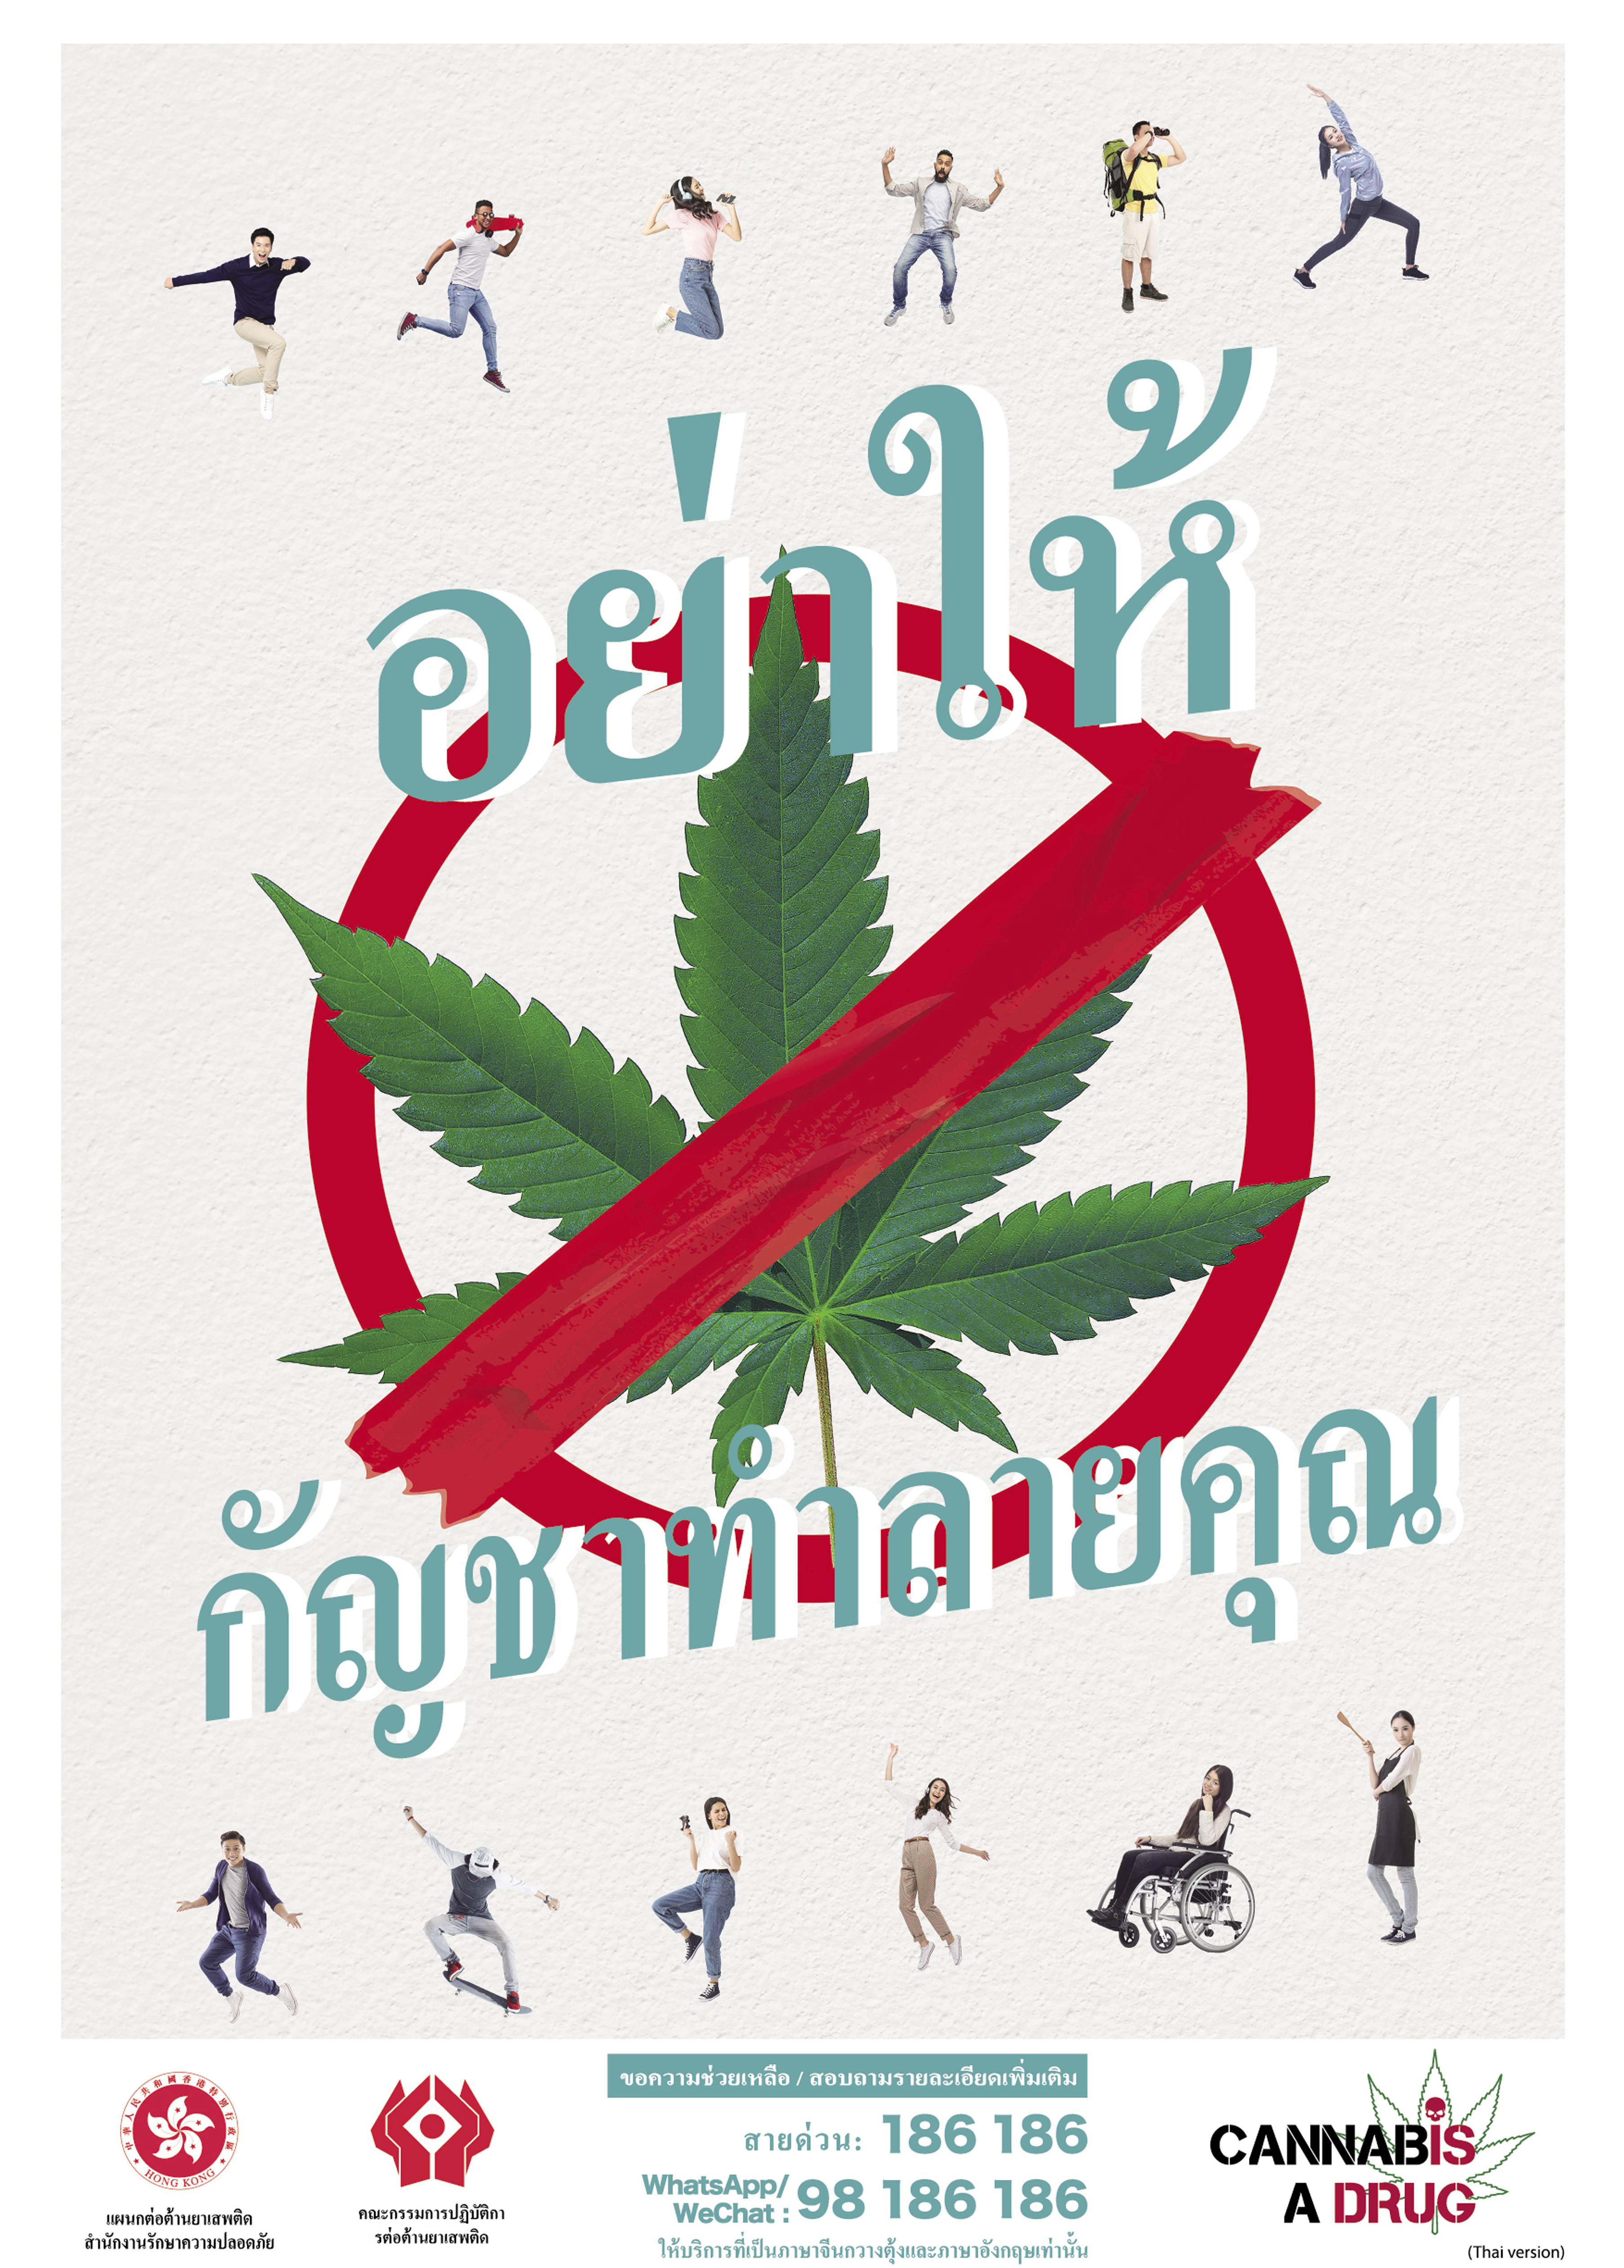 Anti-drug poster "Dont let cannabis ruin you" - Thai version